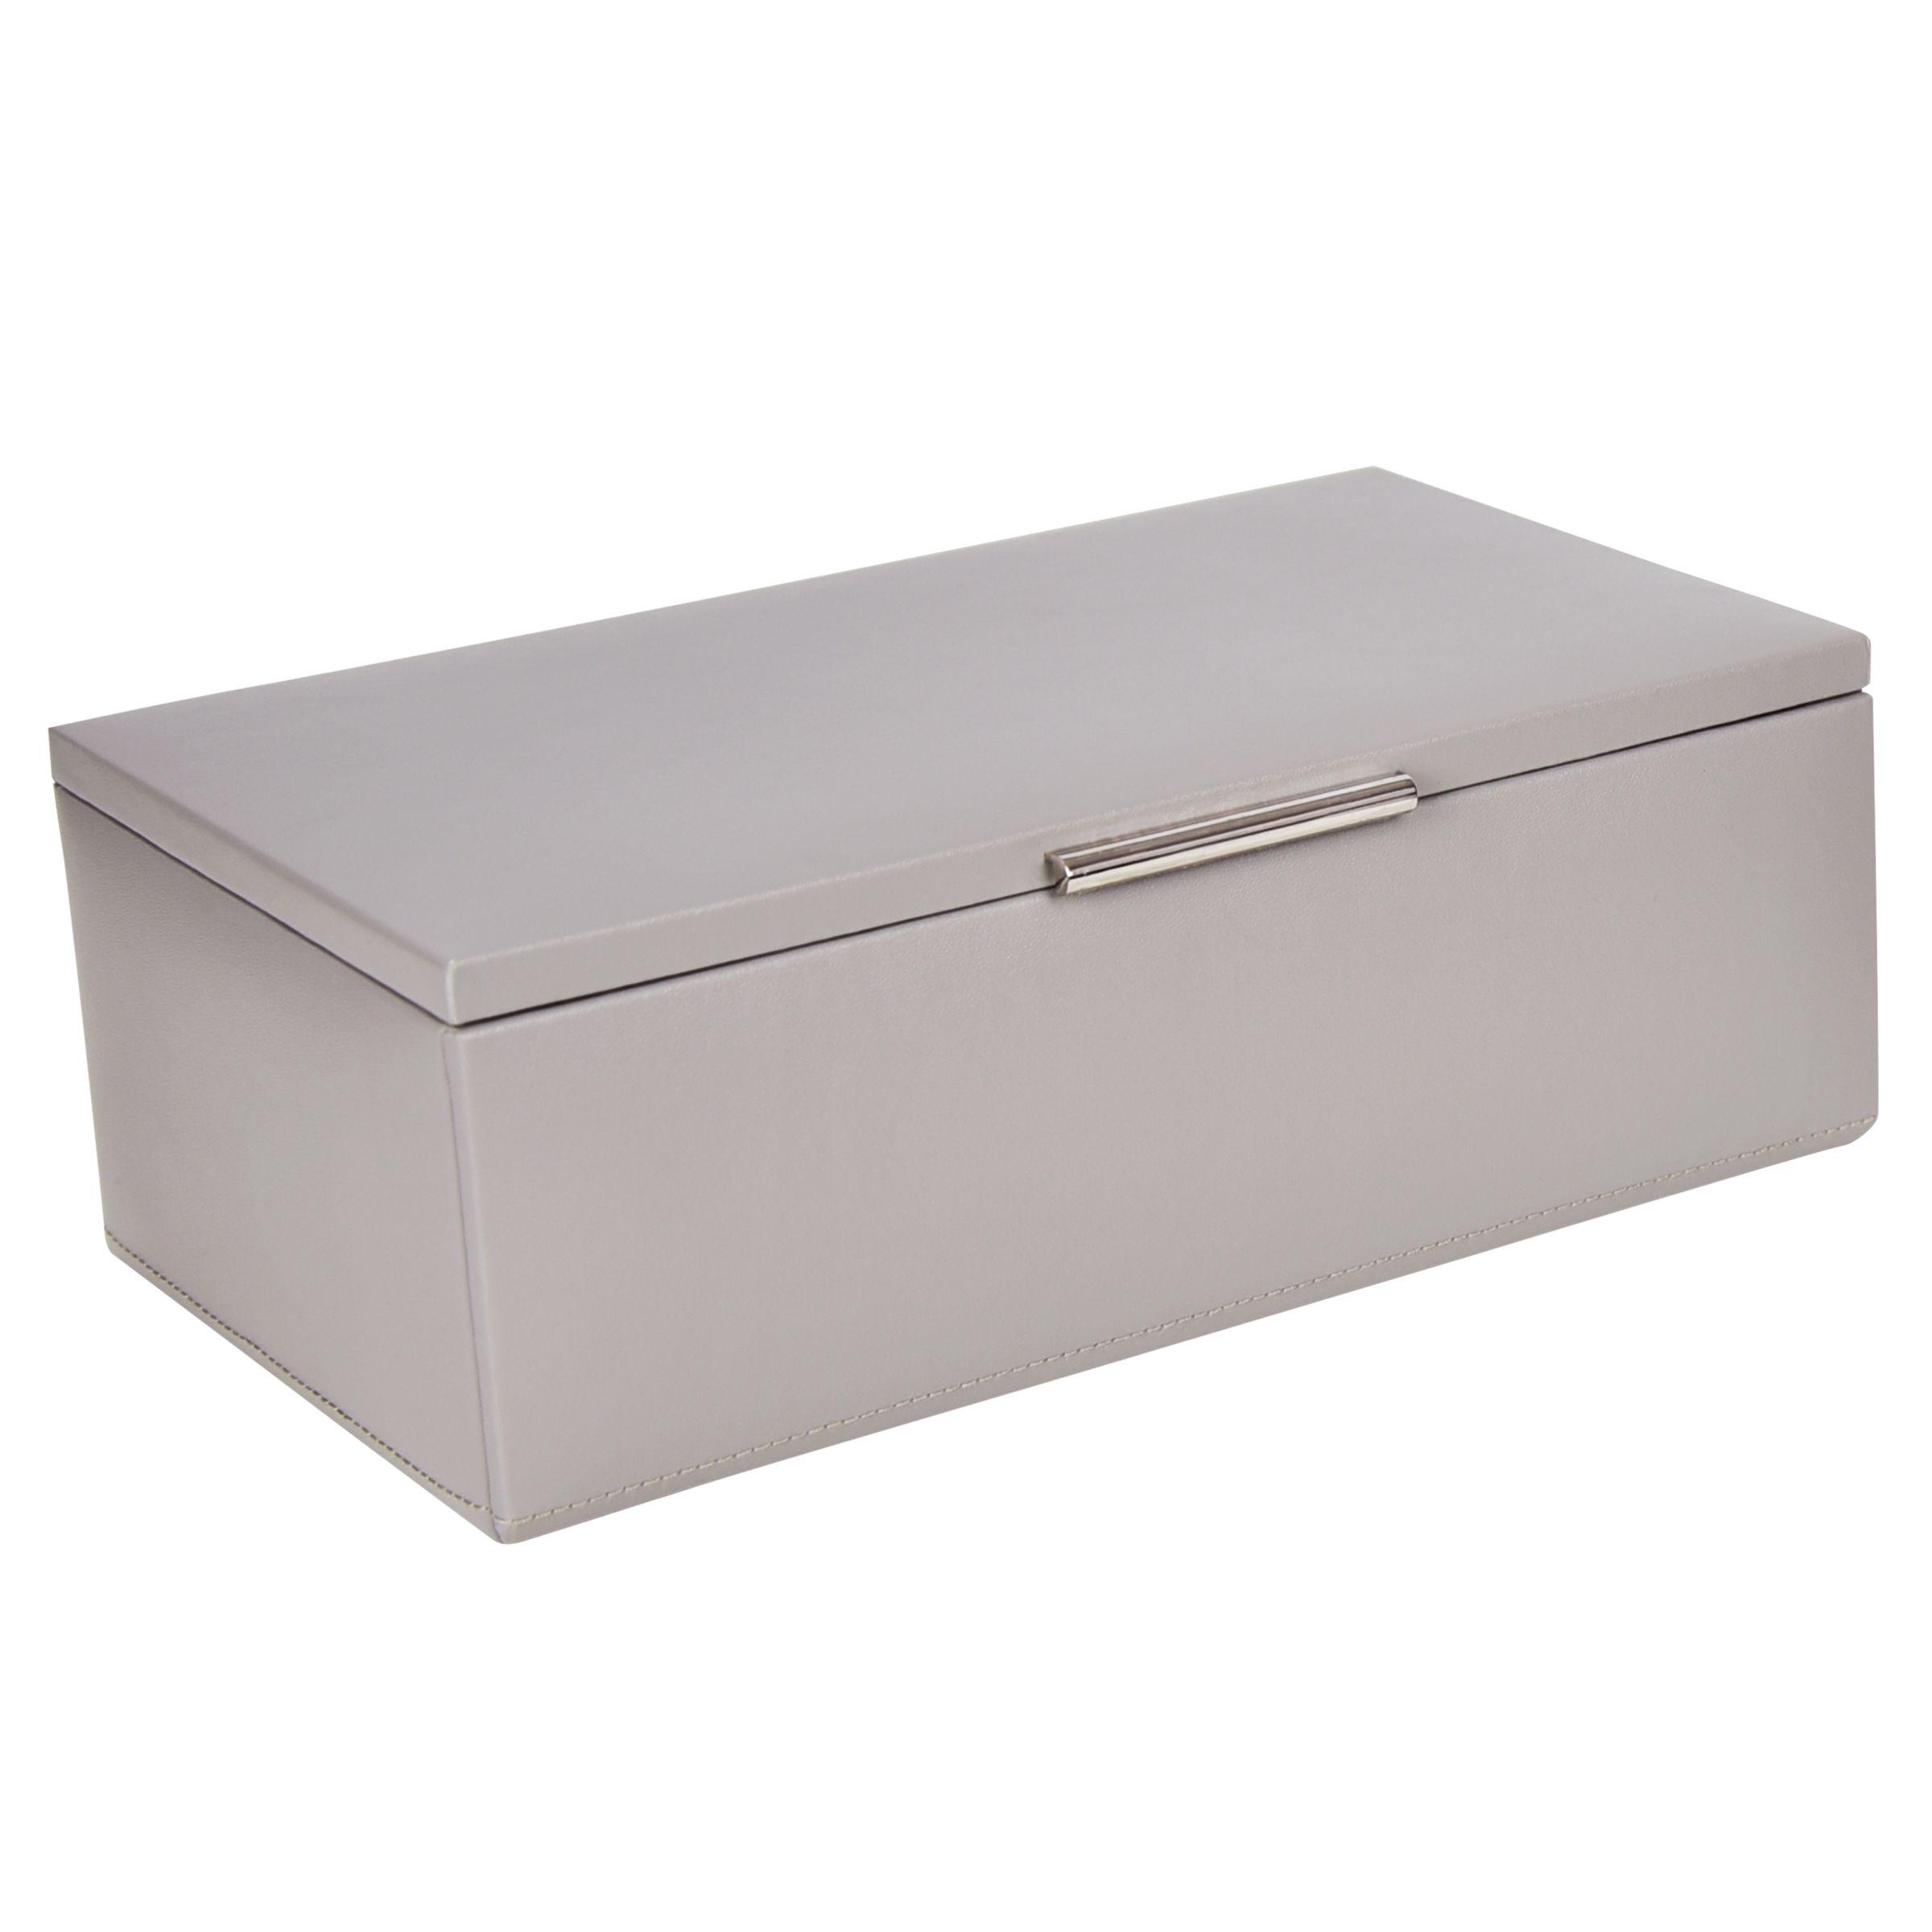 Dulwich Jewellery Box Review